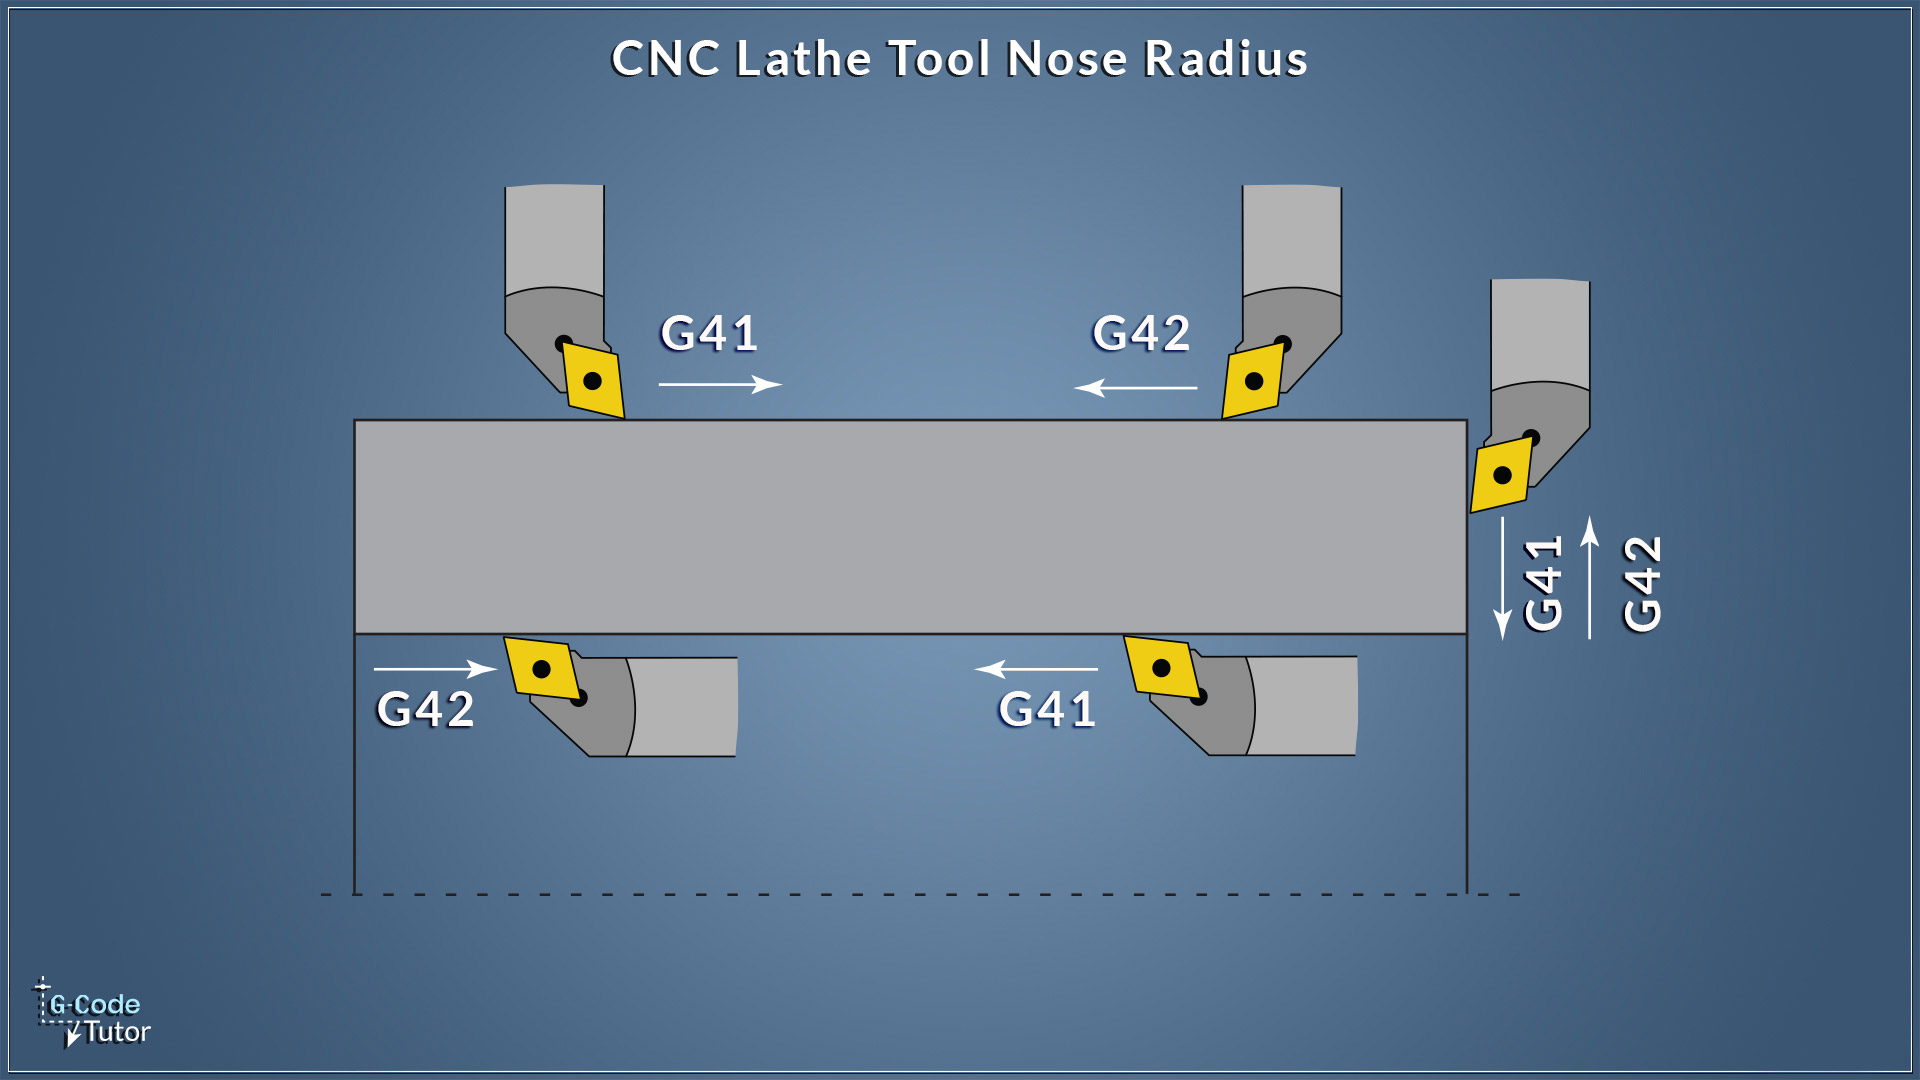 How to Use G41 and G42 in CNC Lathe?